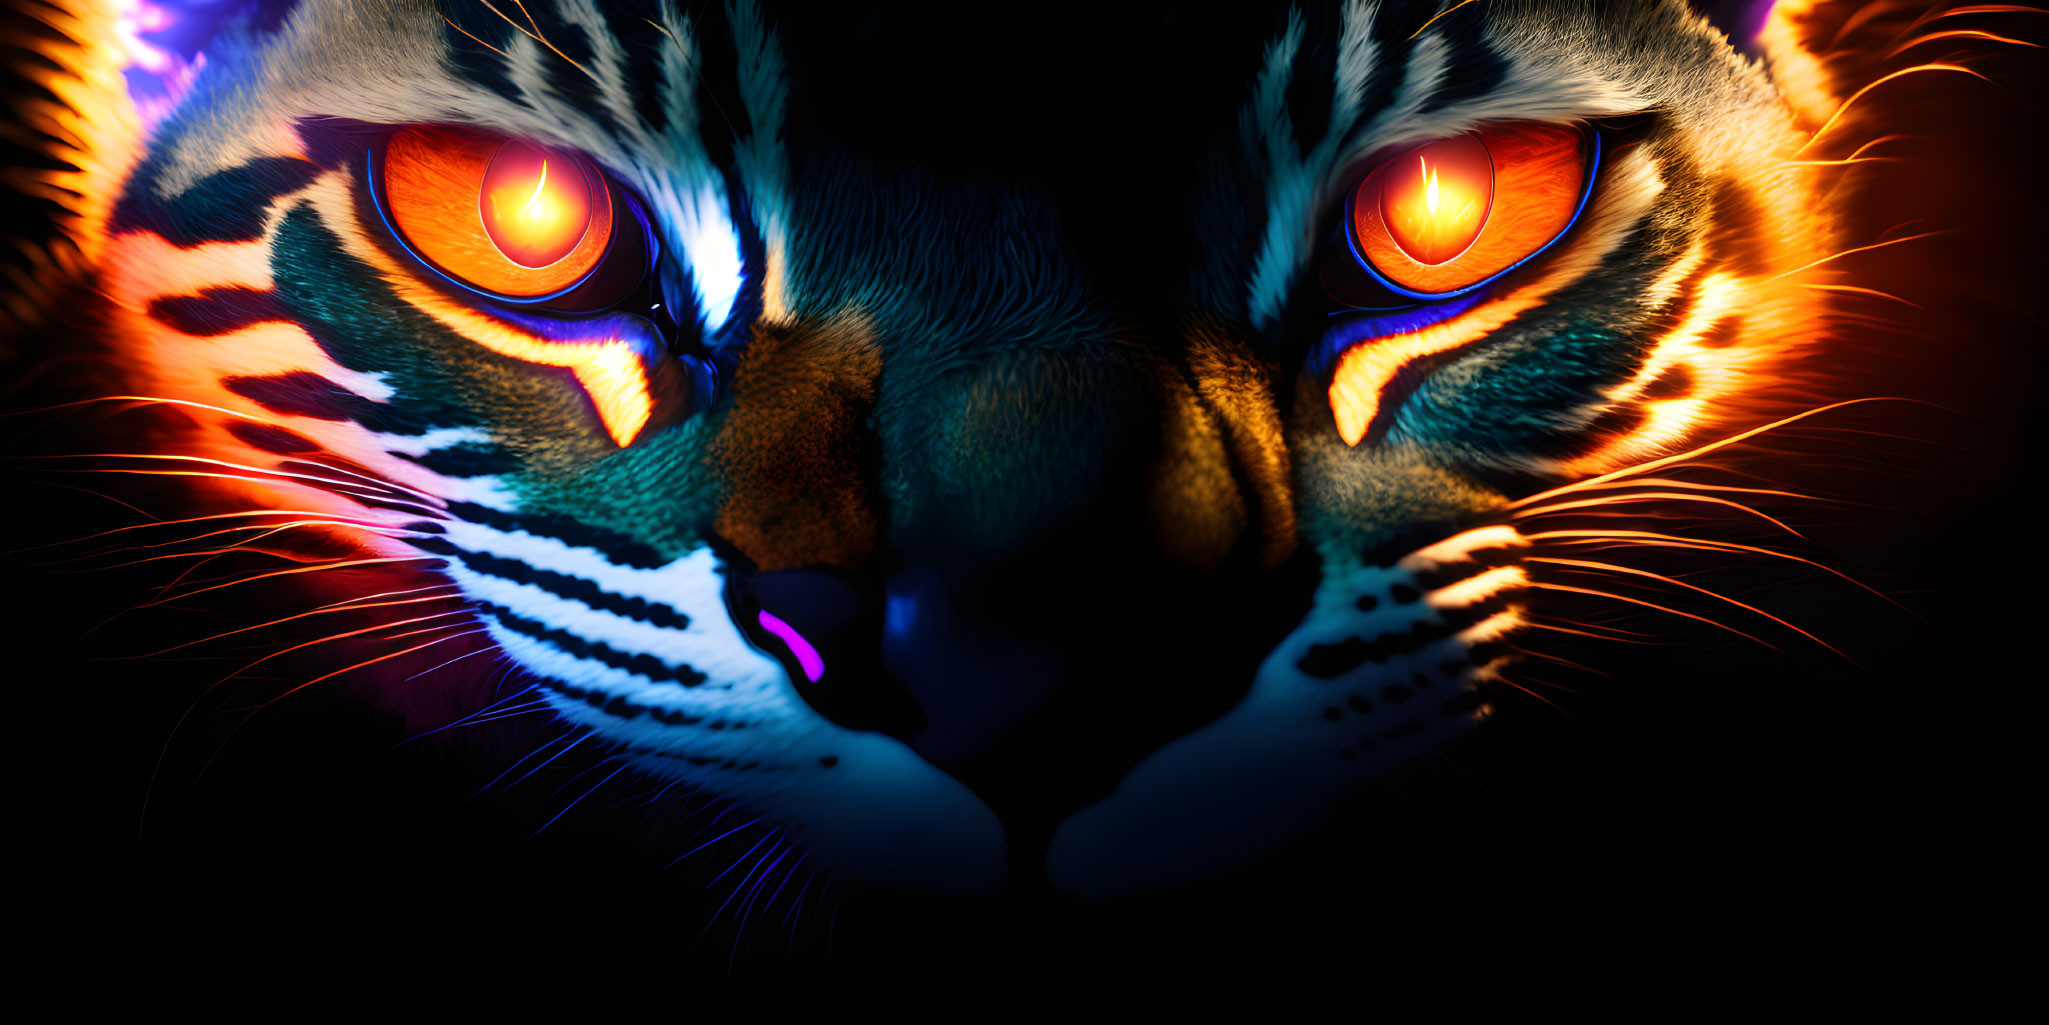 Vividly Colored Tiger Face with Intense Orange Eyes on Dark Background